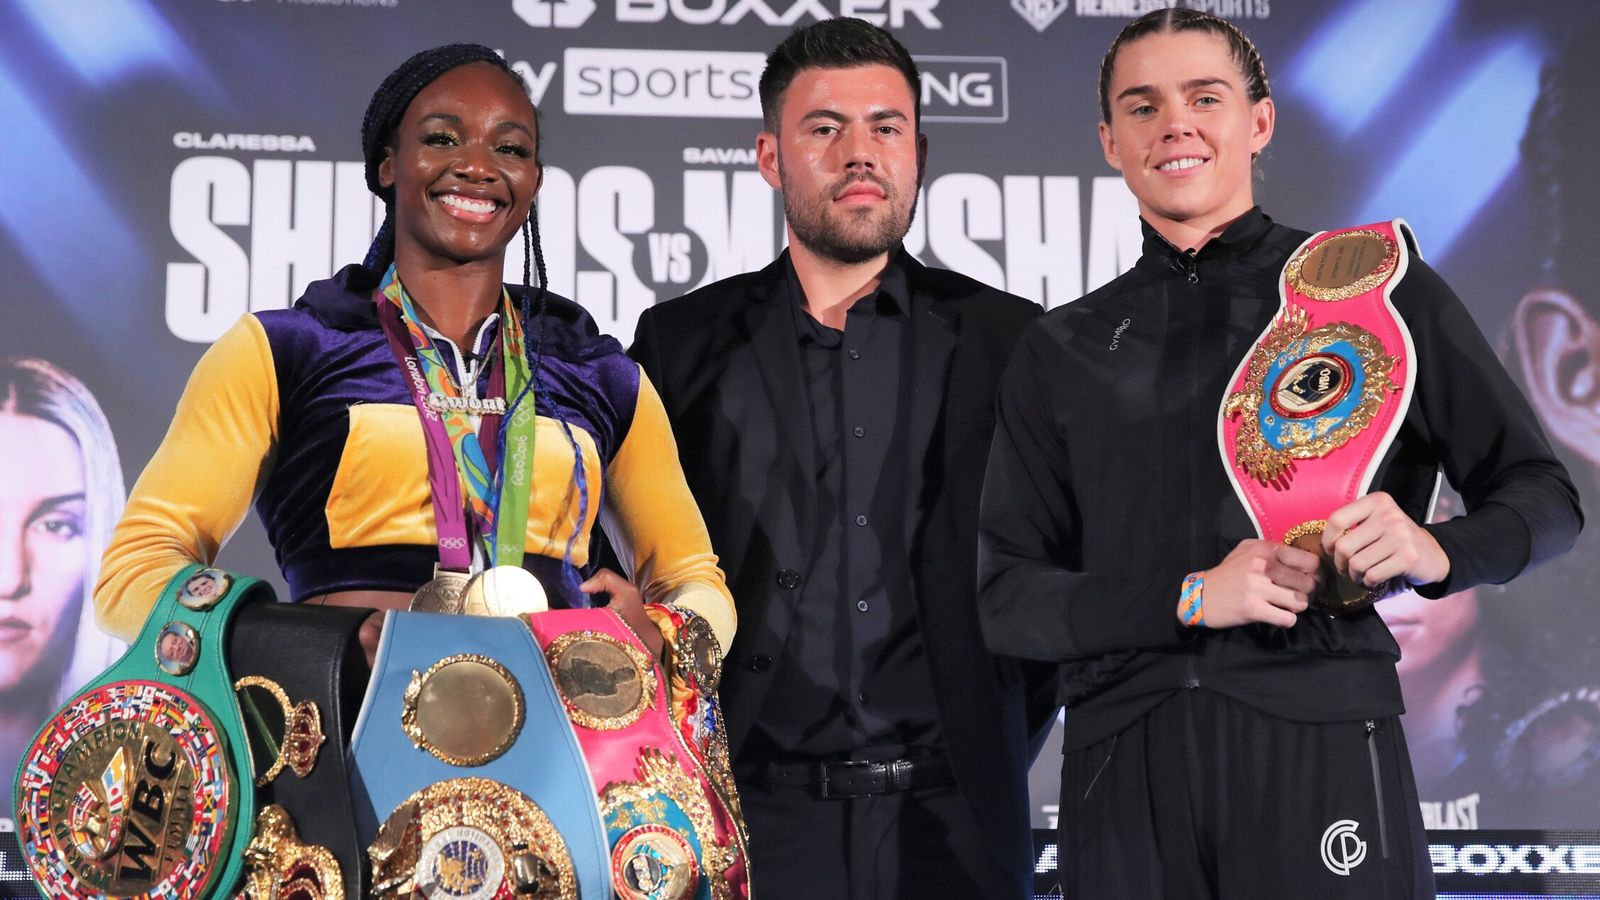 Claressa Shields vs Savannah Marshall What time are they in the ring? How can I watch? Boxing News Sky Sports